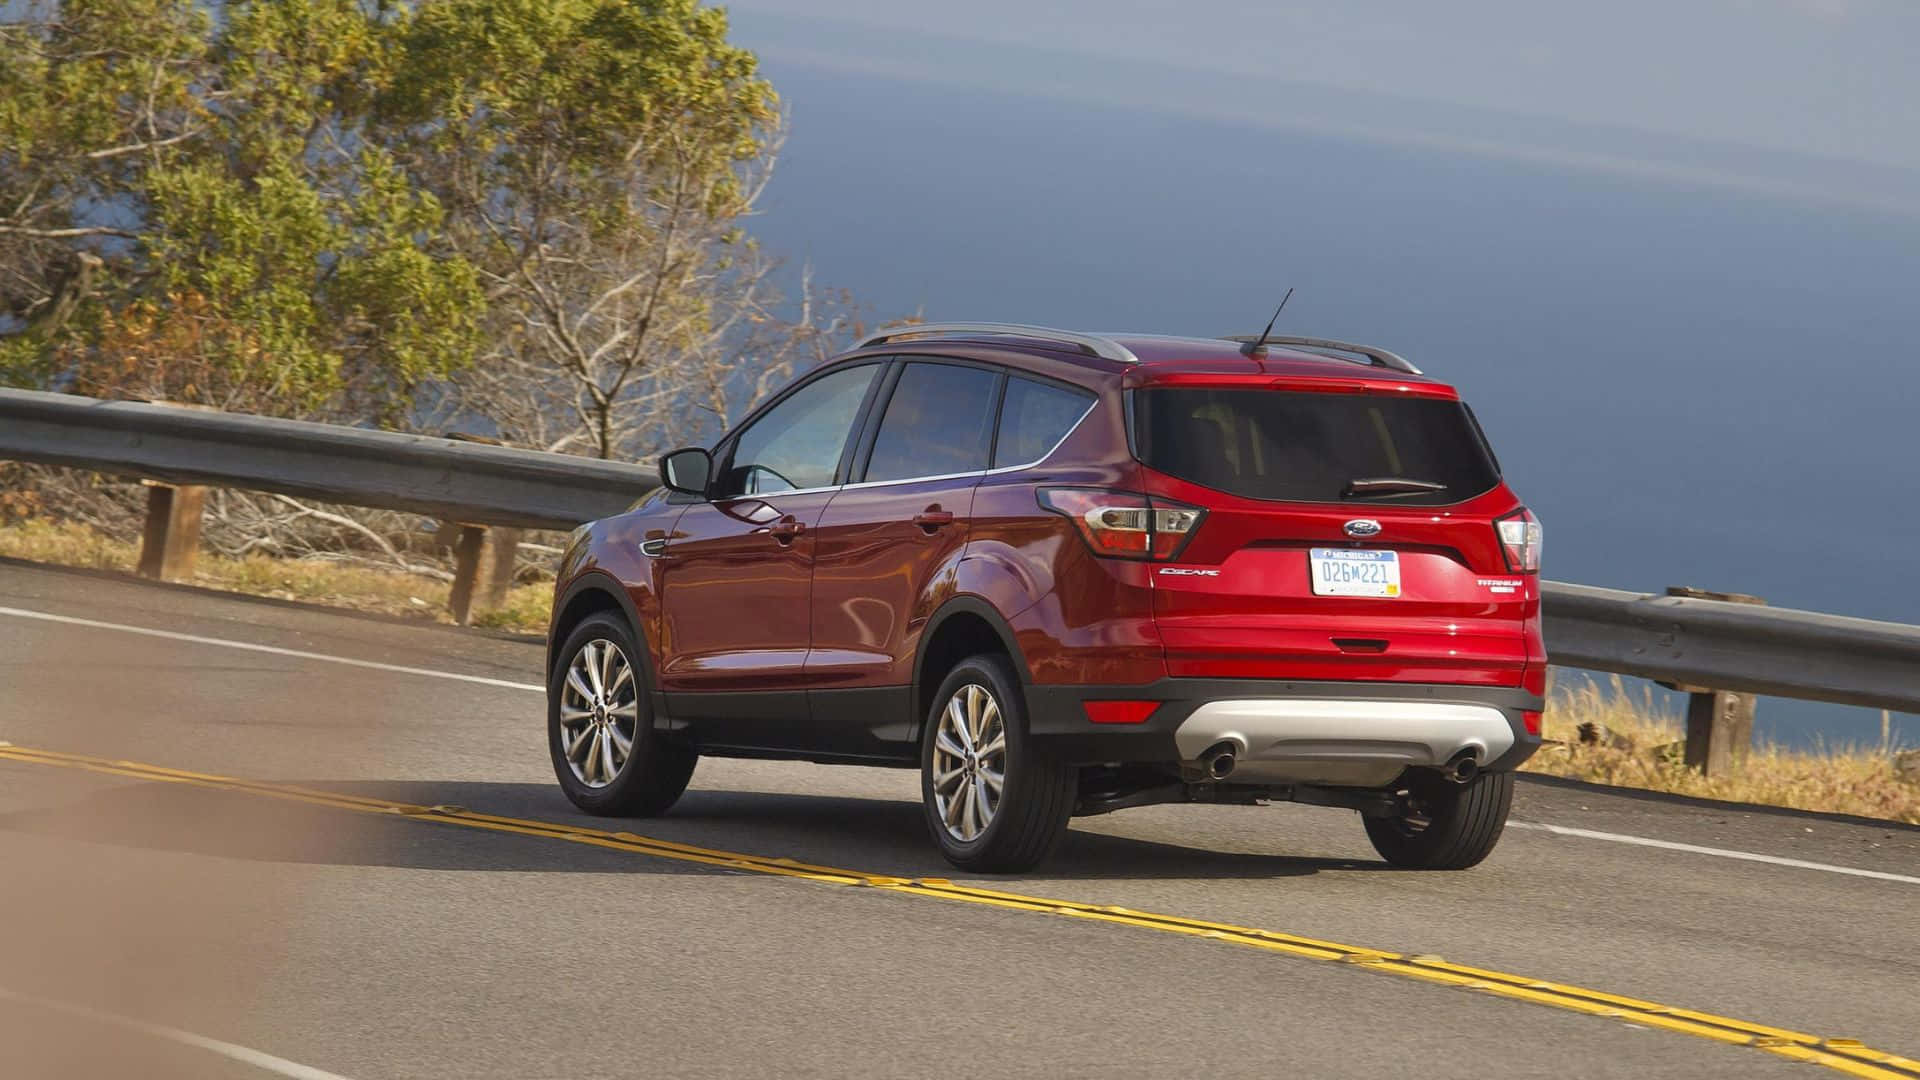 Sleek Ford Escape in Stunning Background Wallpaper